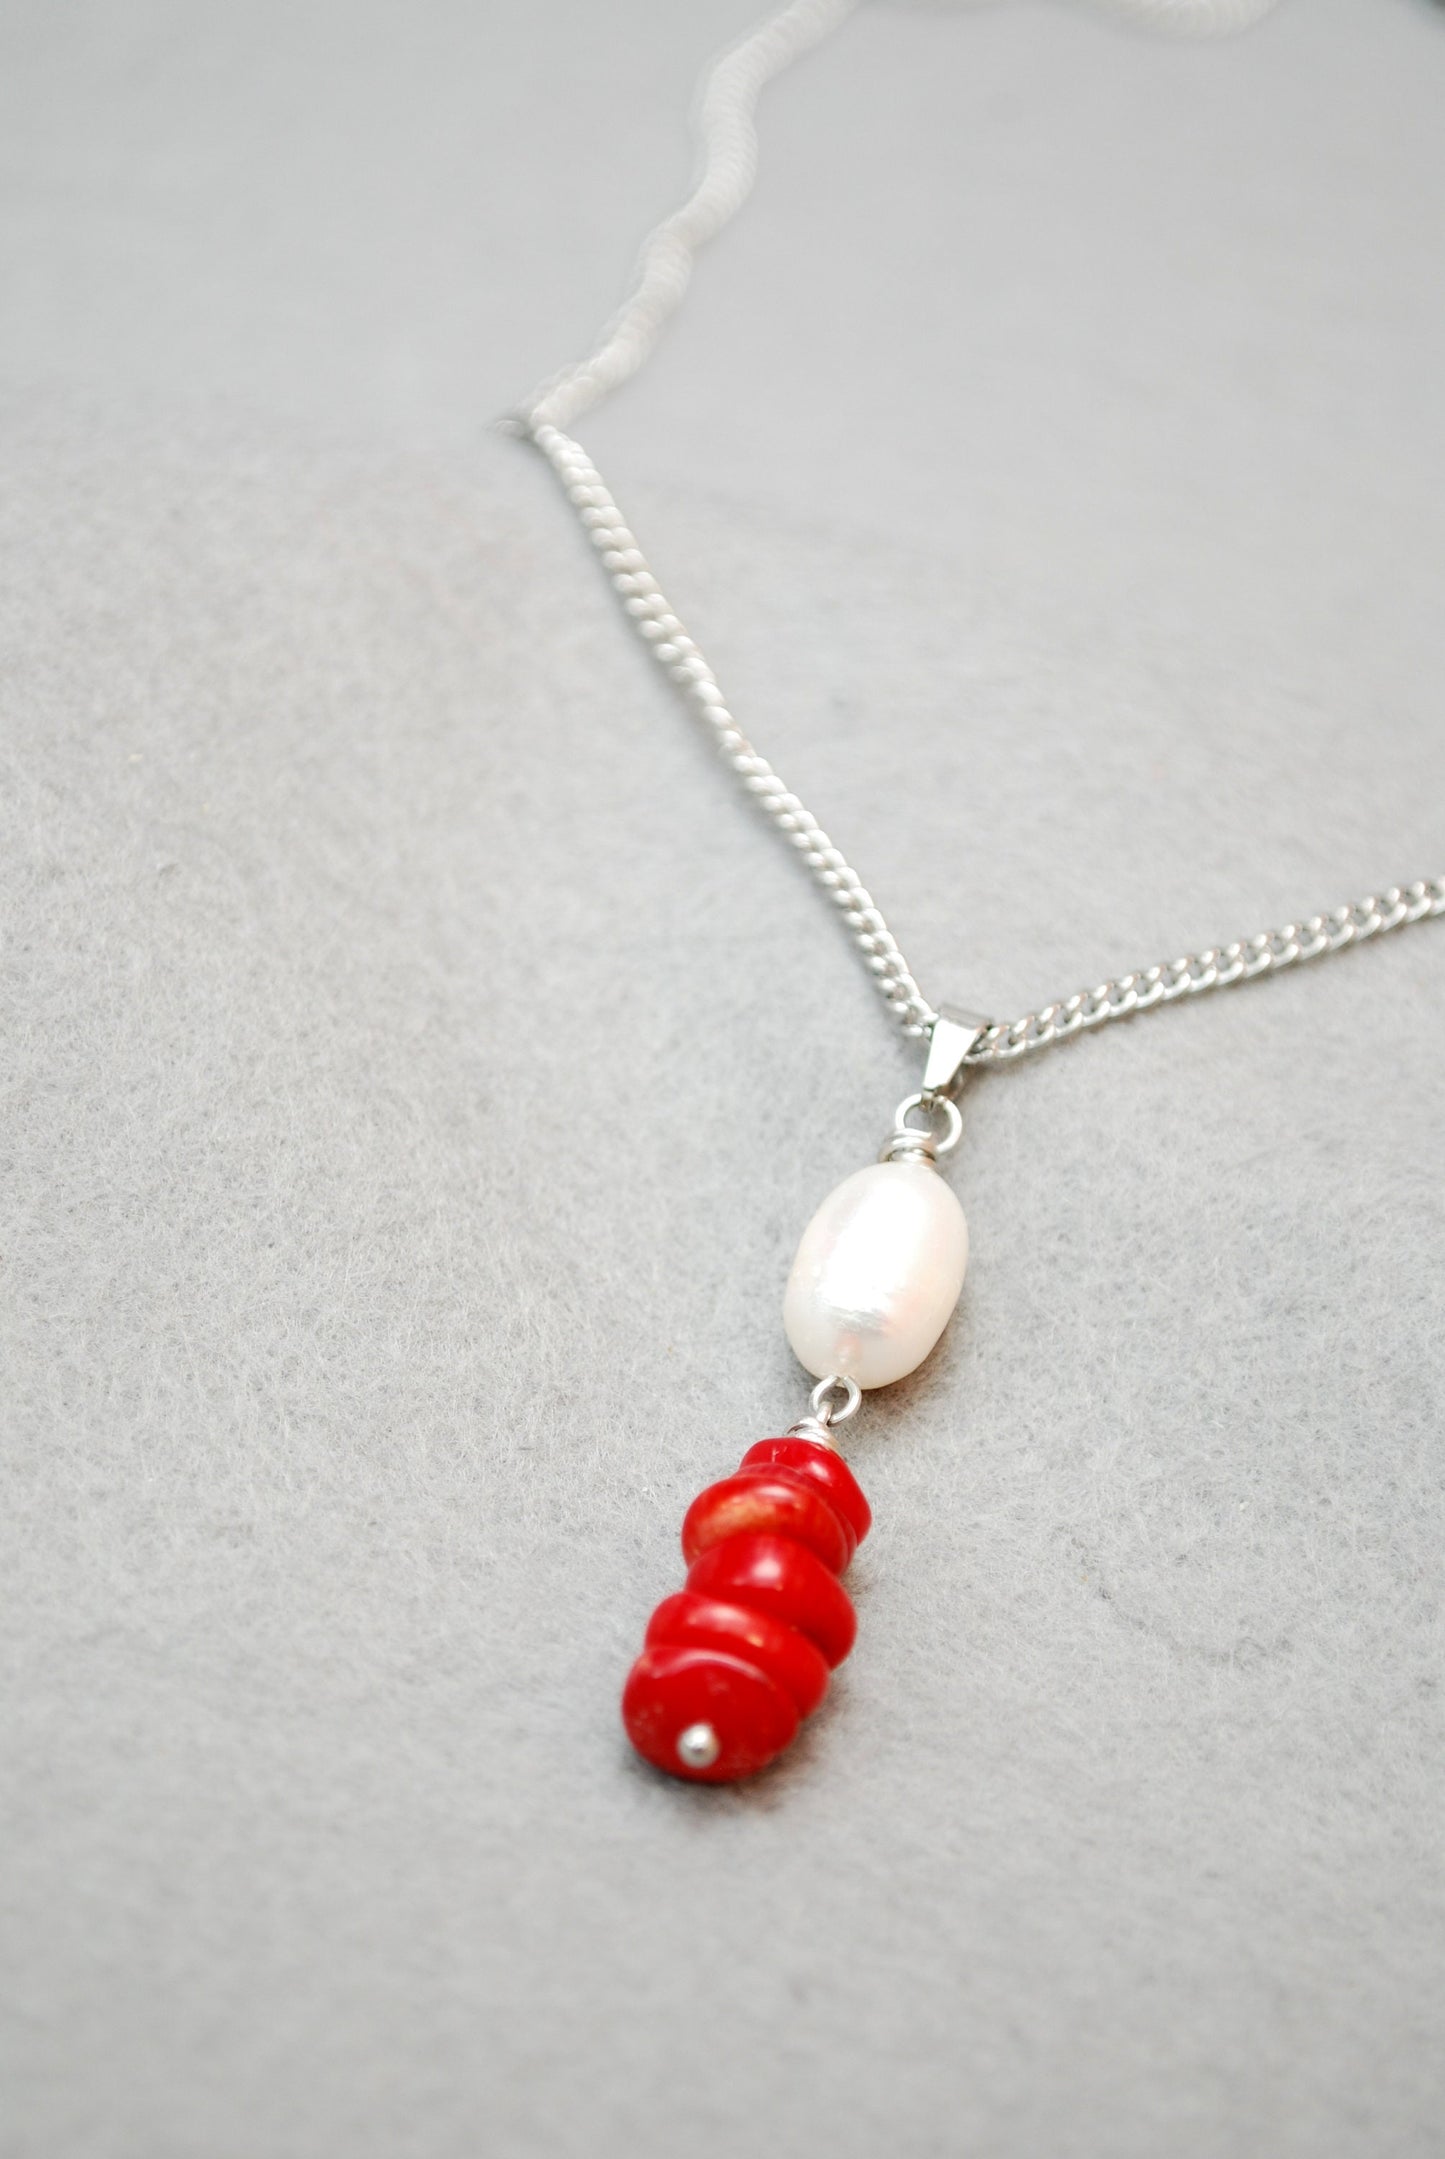 Elegant Stainless Steel Necklace with Freshwater Pearl Pendant and Coral Stones, Estibela design, Delicate pearl & stone pendant